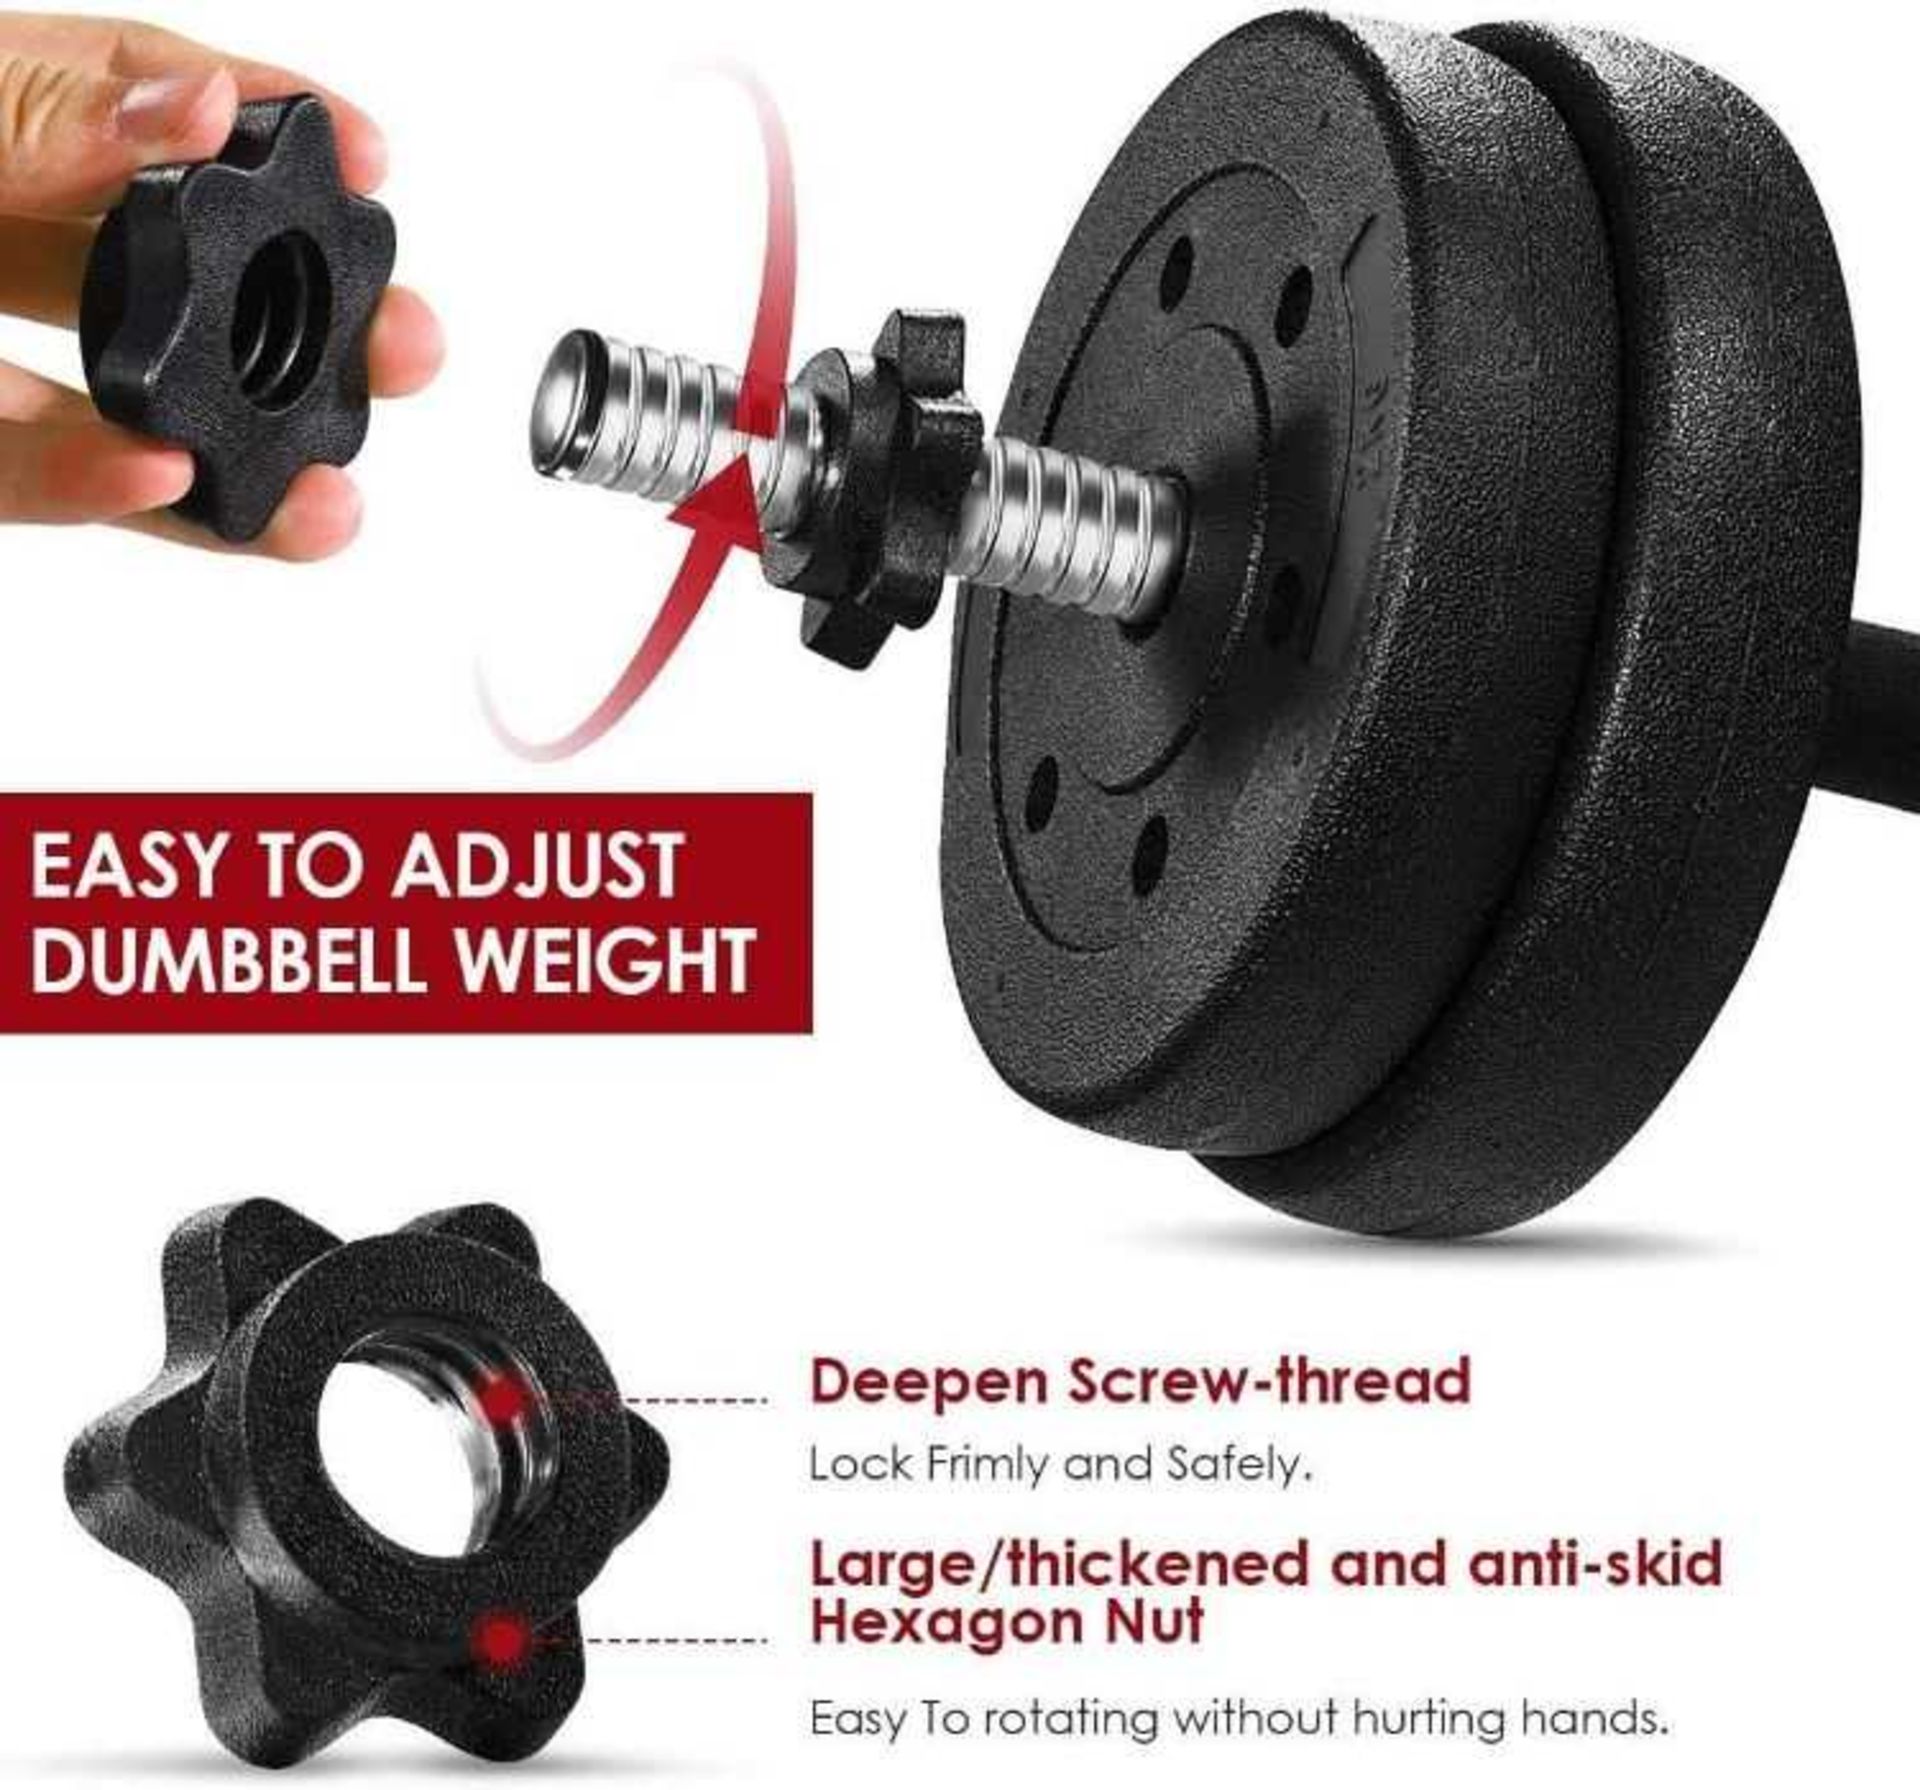 VAT 1x Movtotop 30KG adjustable Dumb Bell weight set, new and boxed, we can only find these in - Image 2 of 5